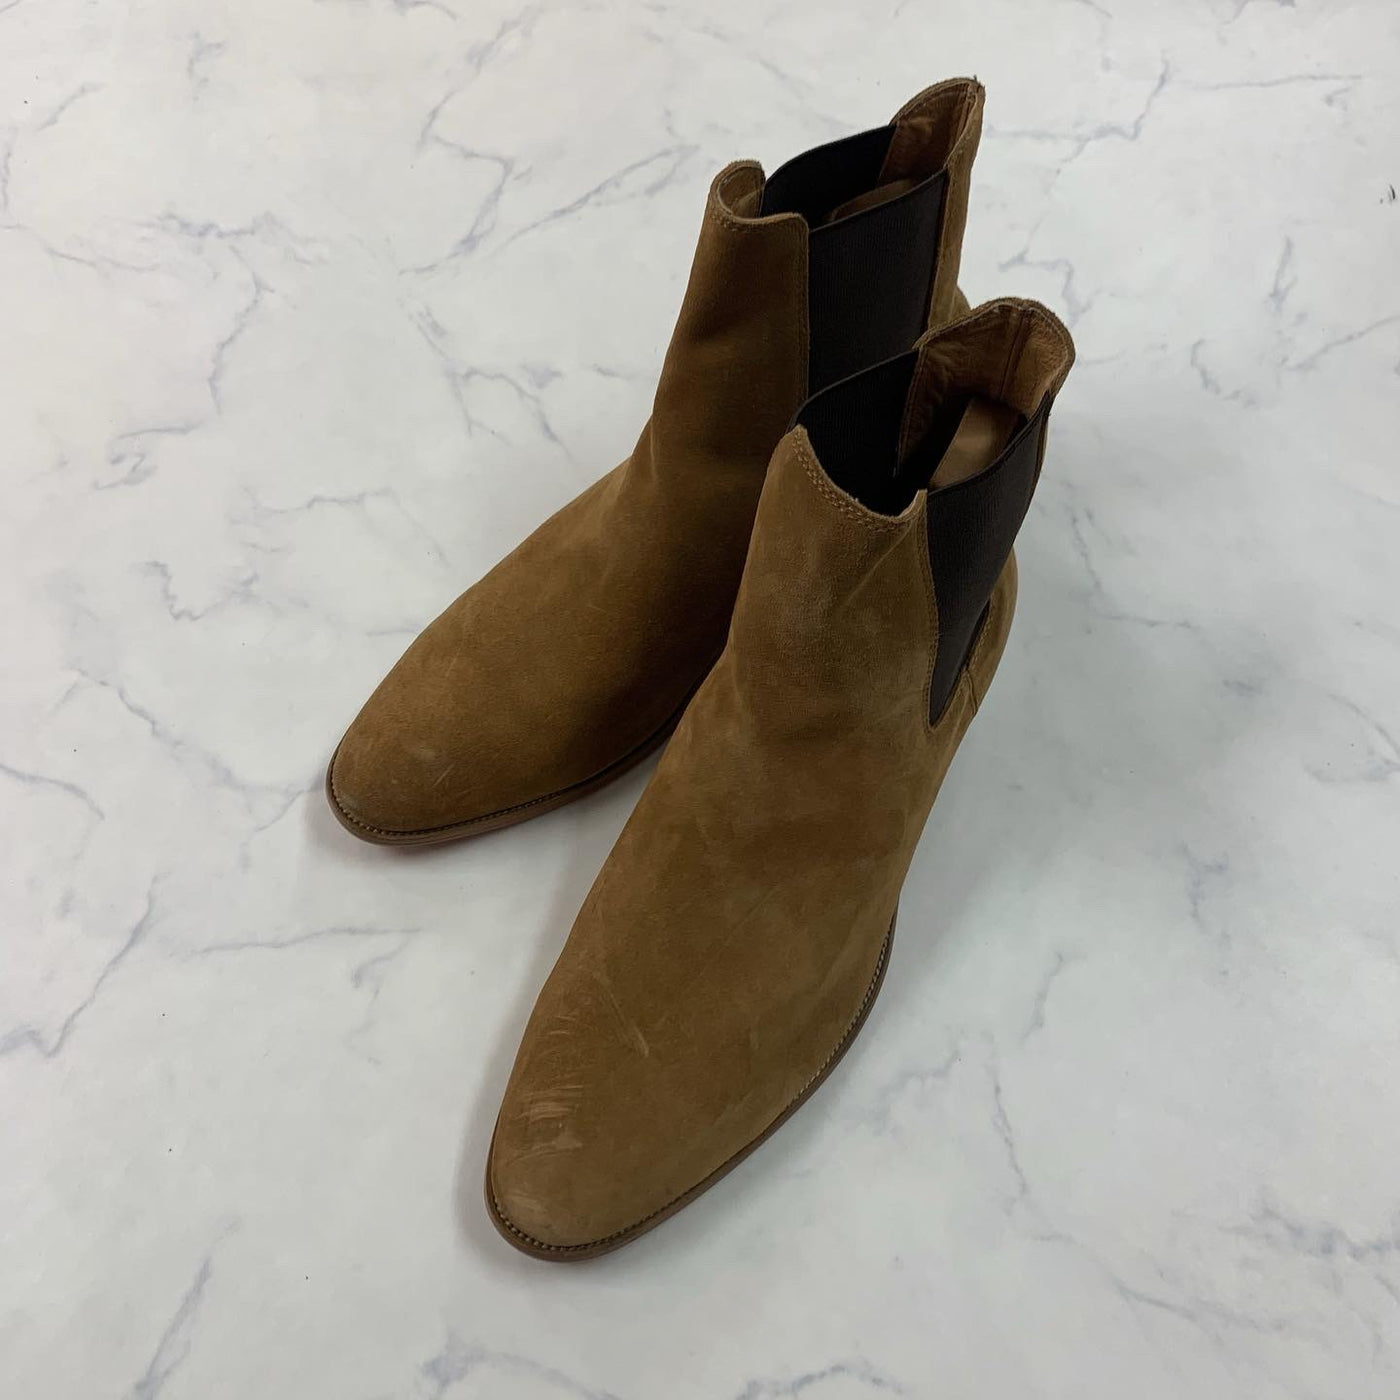 [Instant delivery]"Suede side gore boots"Suede side gore boots (brown)